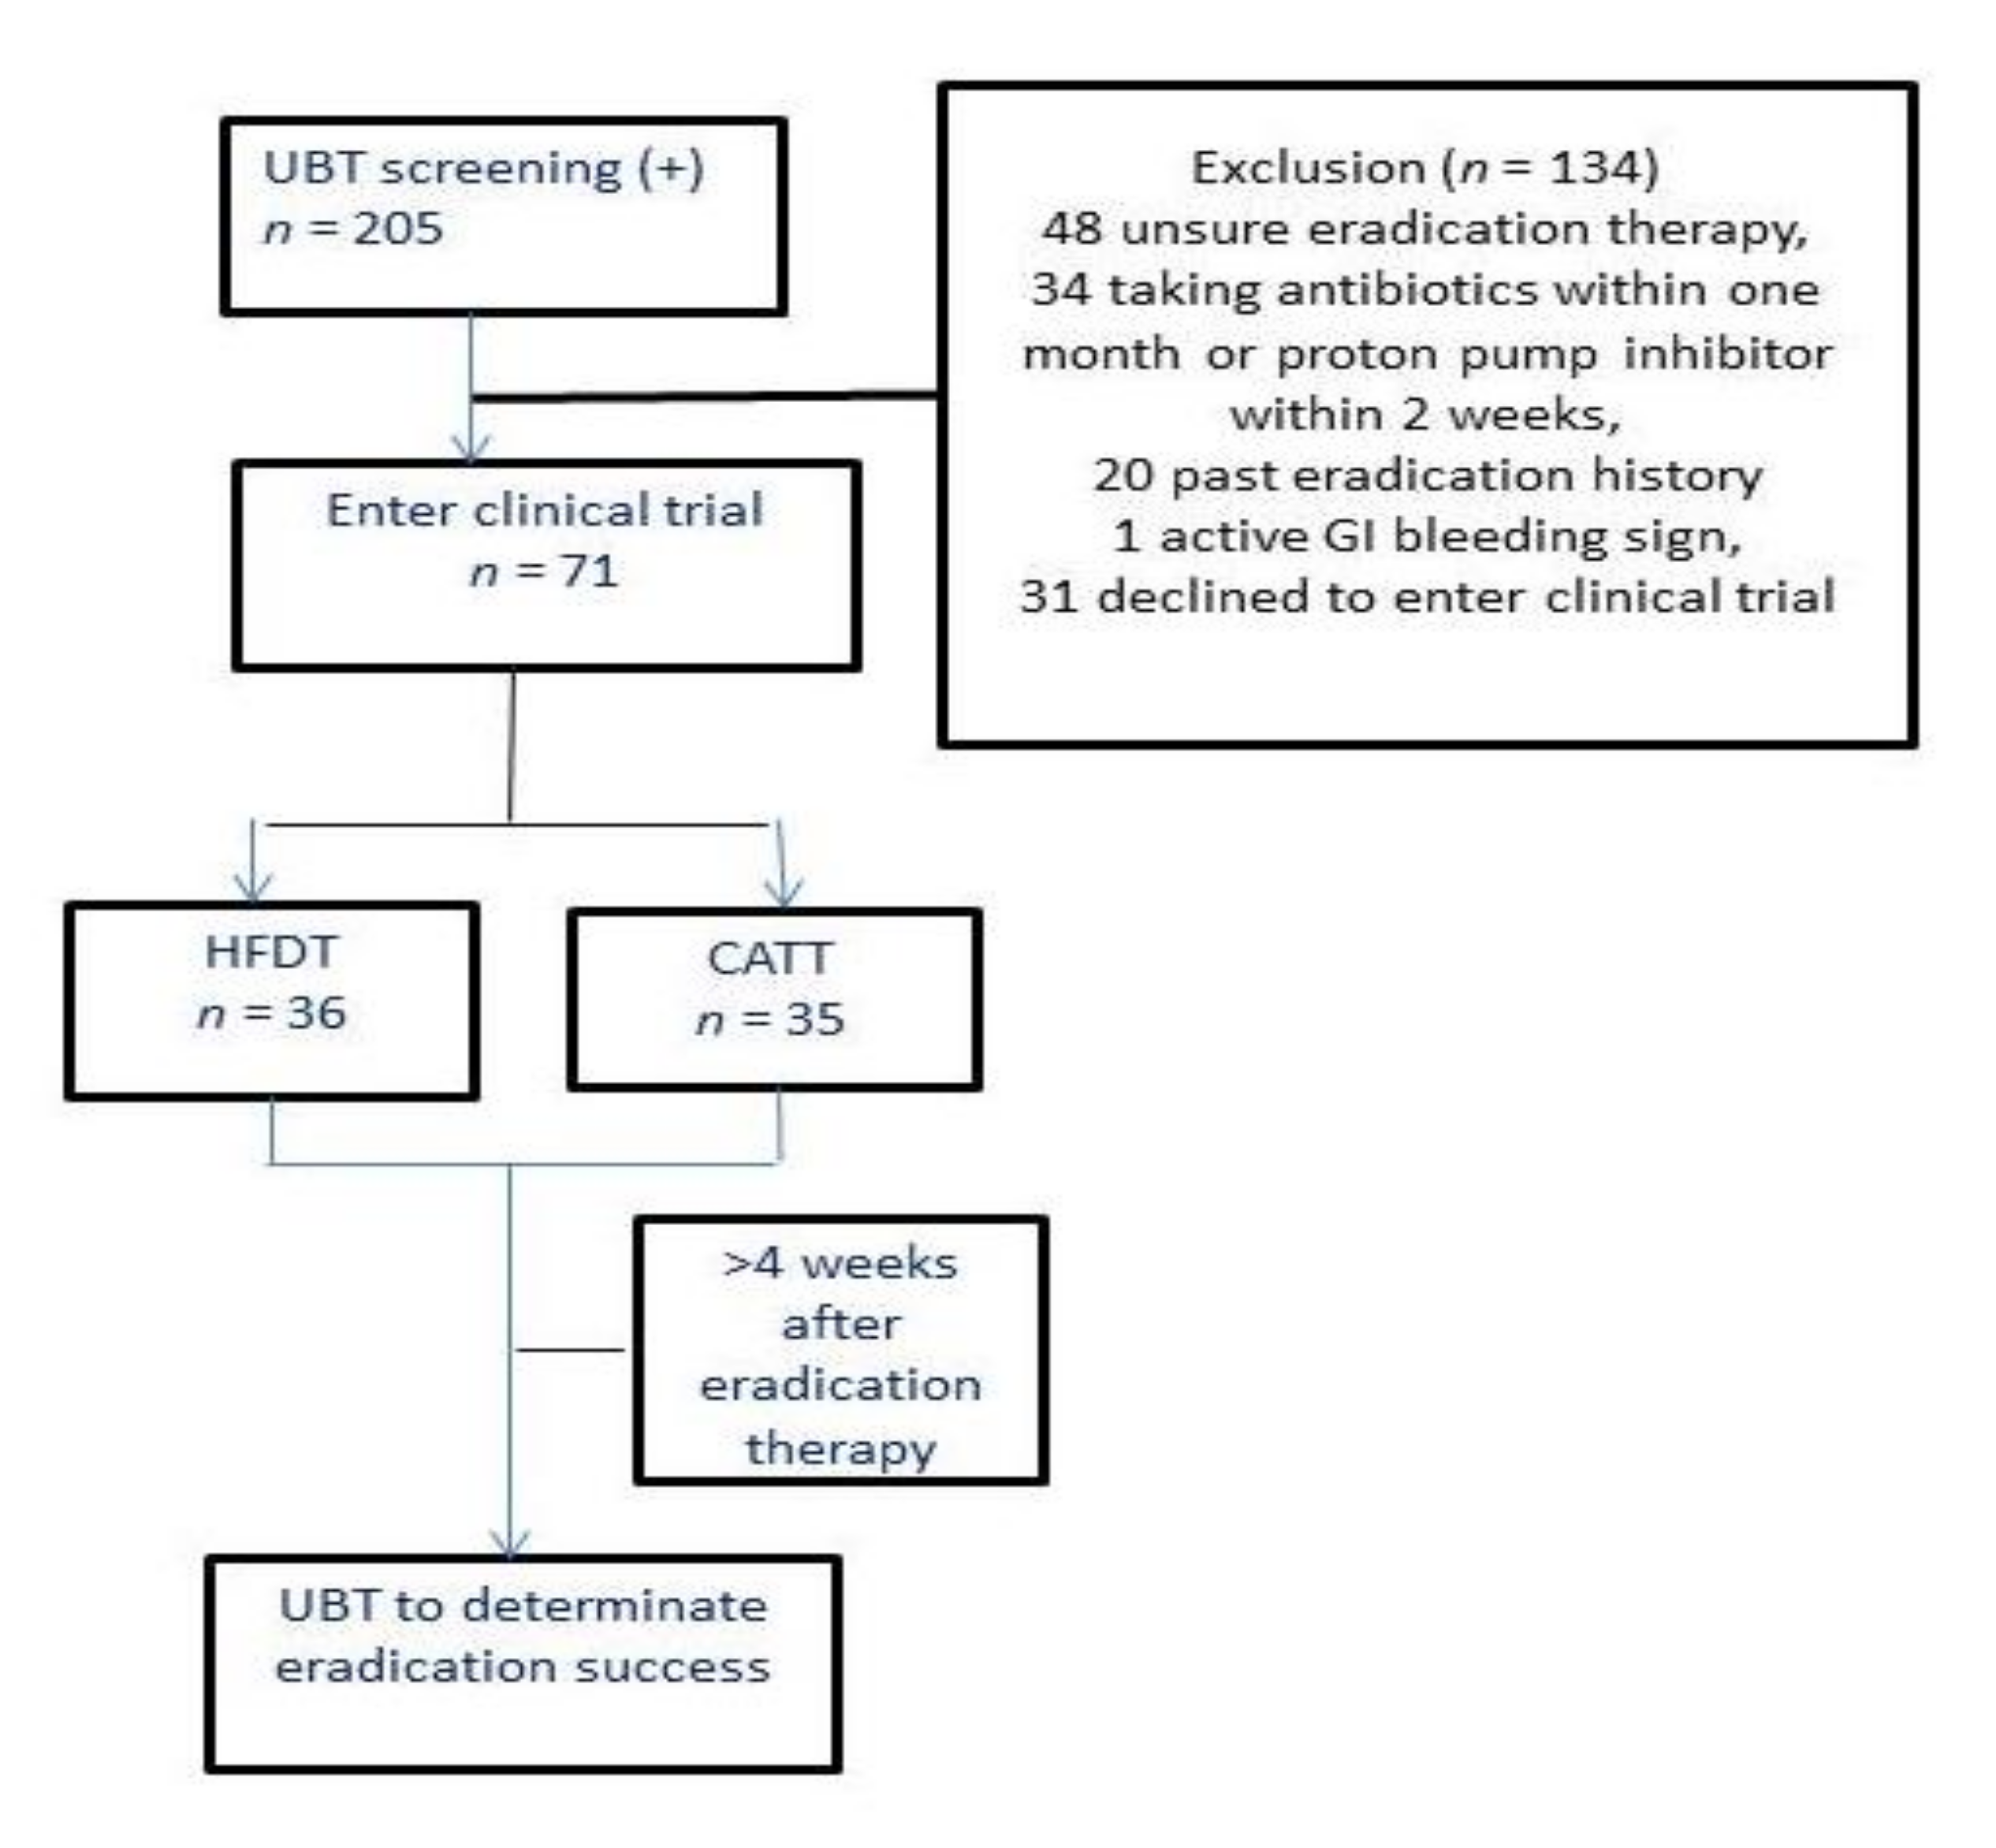 JCM | Full-Text | The of High-Dose Pump Inhibitor Induction Treatment before Dual Therapy for Helicobacter pylori Eradication: An Open-Label Random Trial